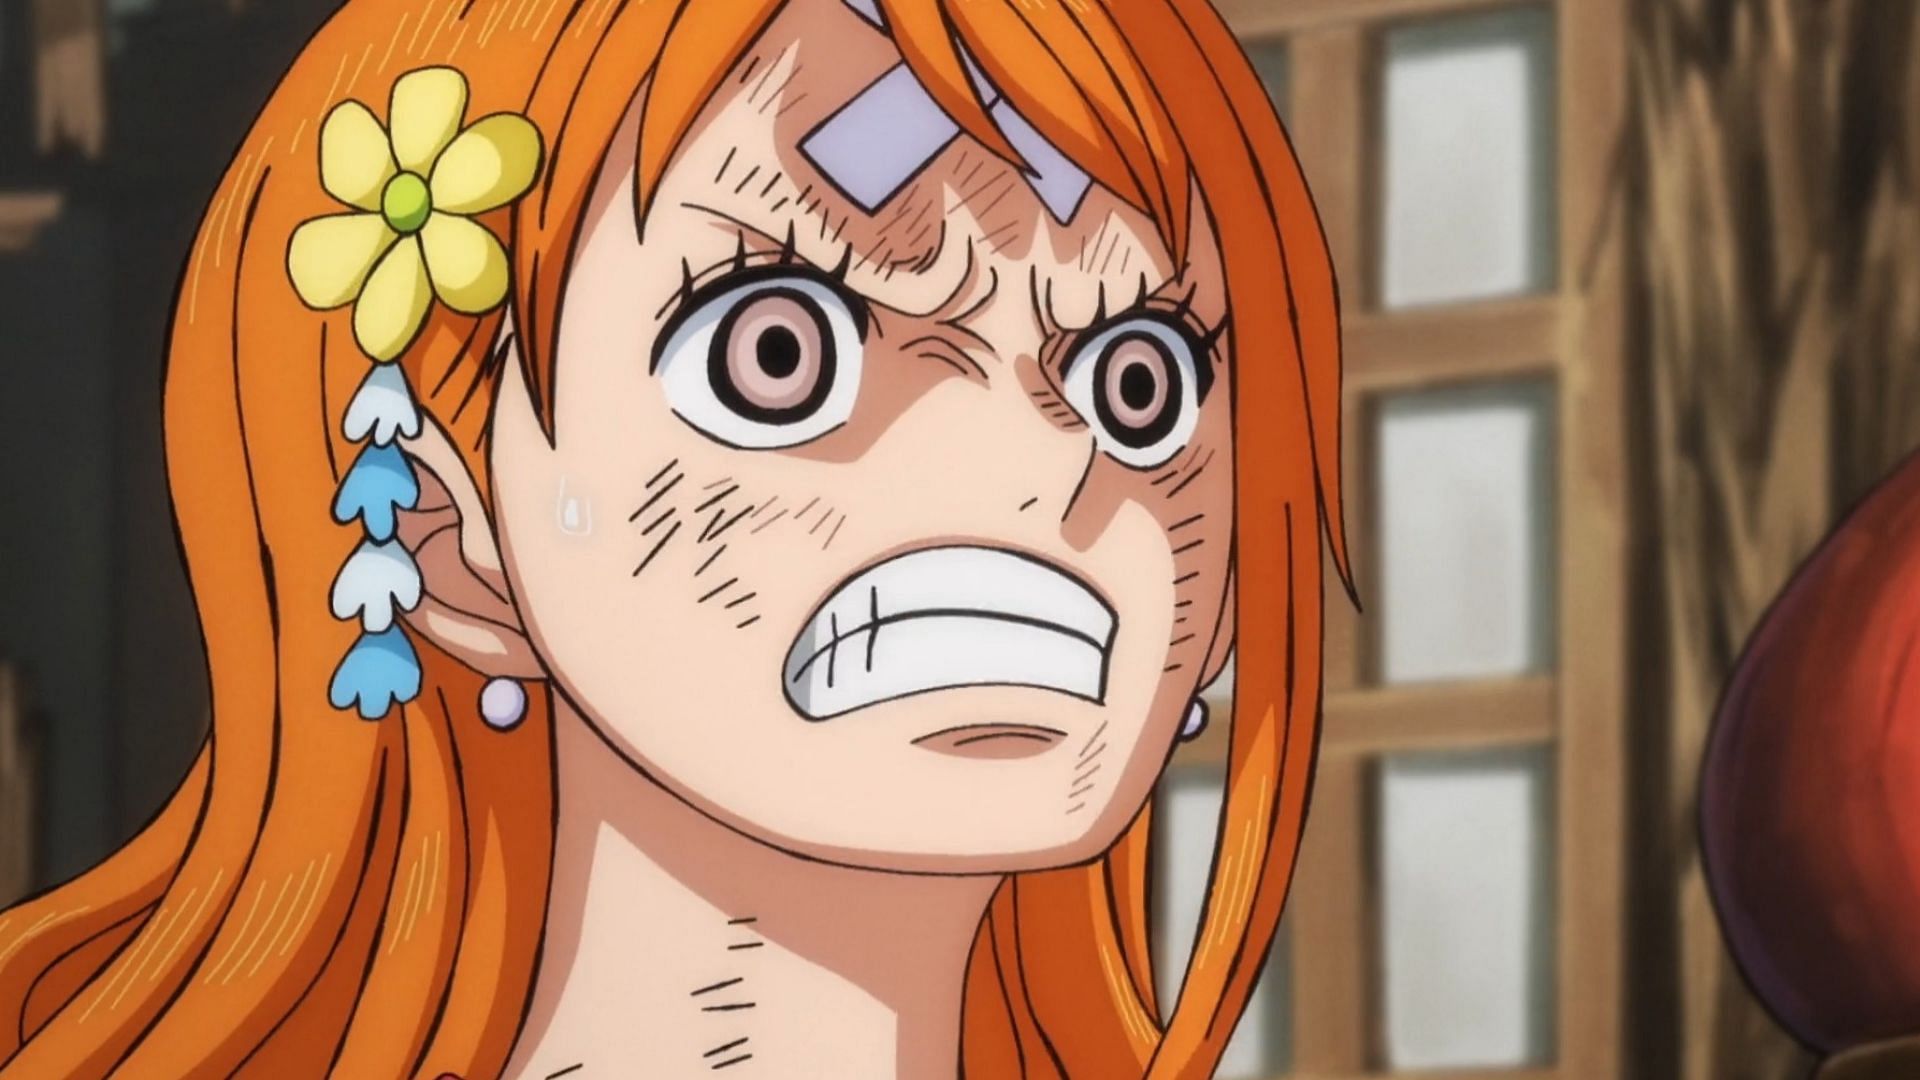 One Piece episode 1070: One Piece Episode 1070: Check release date